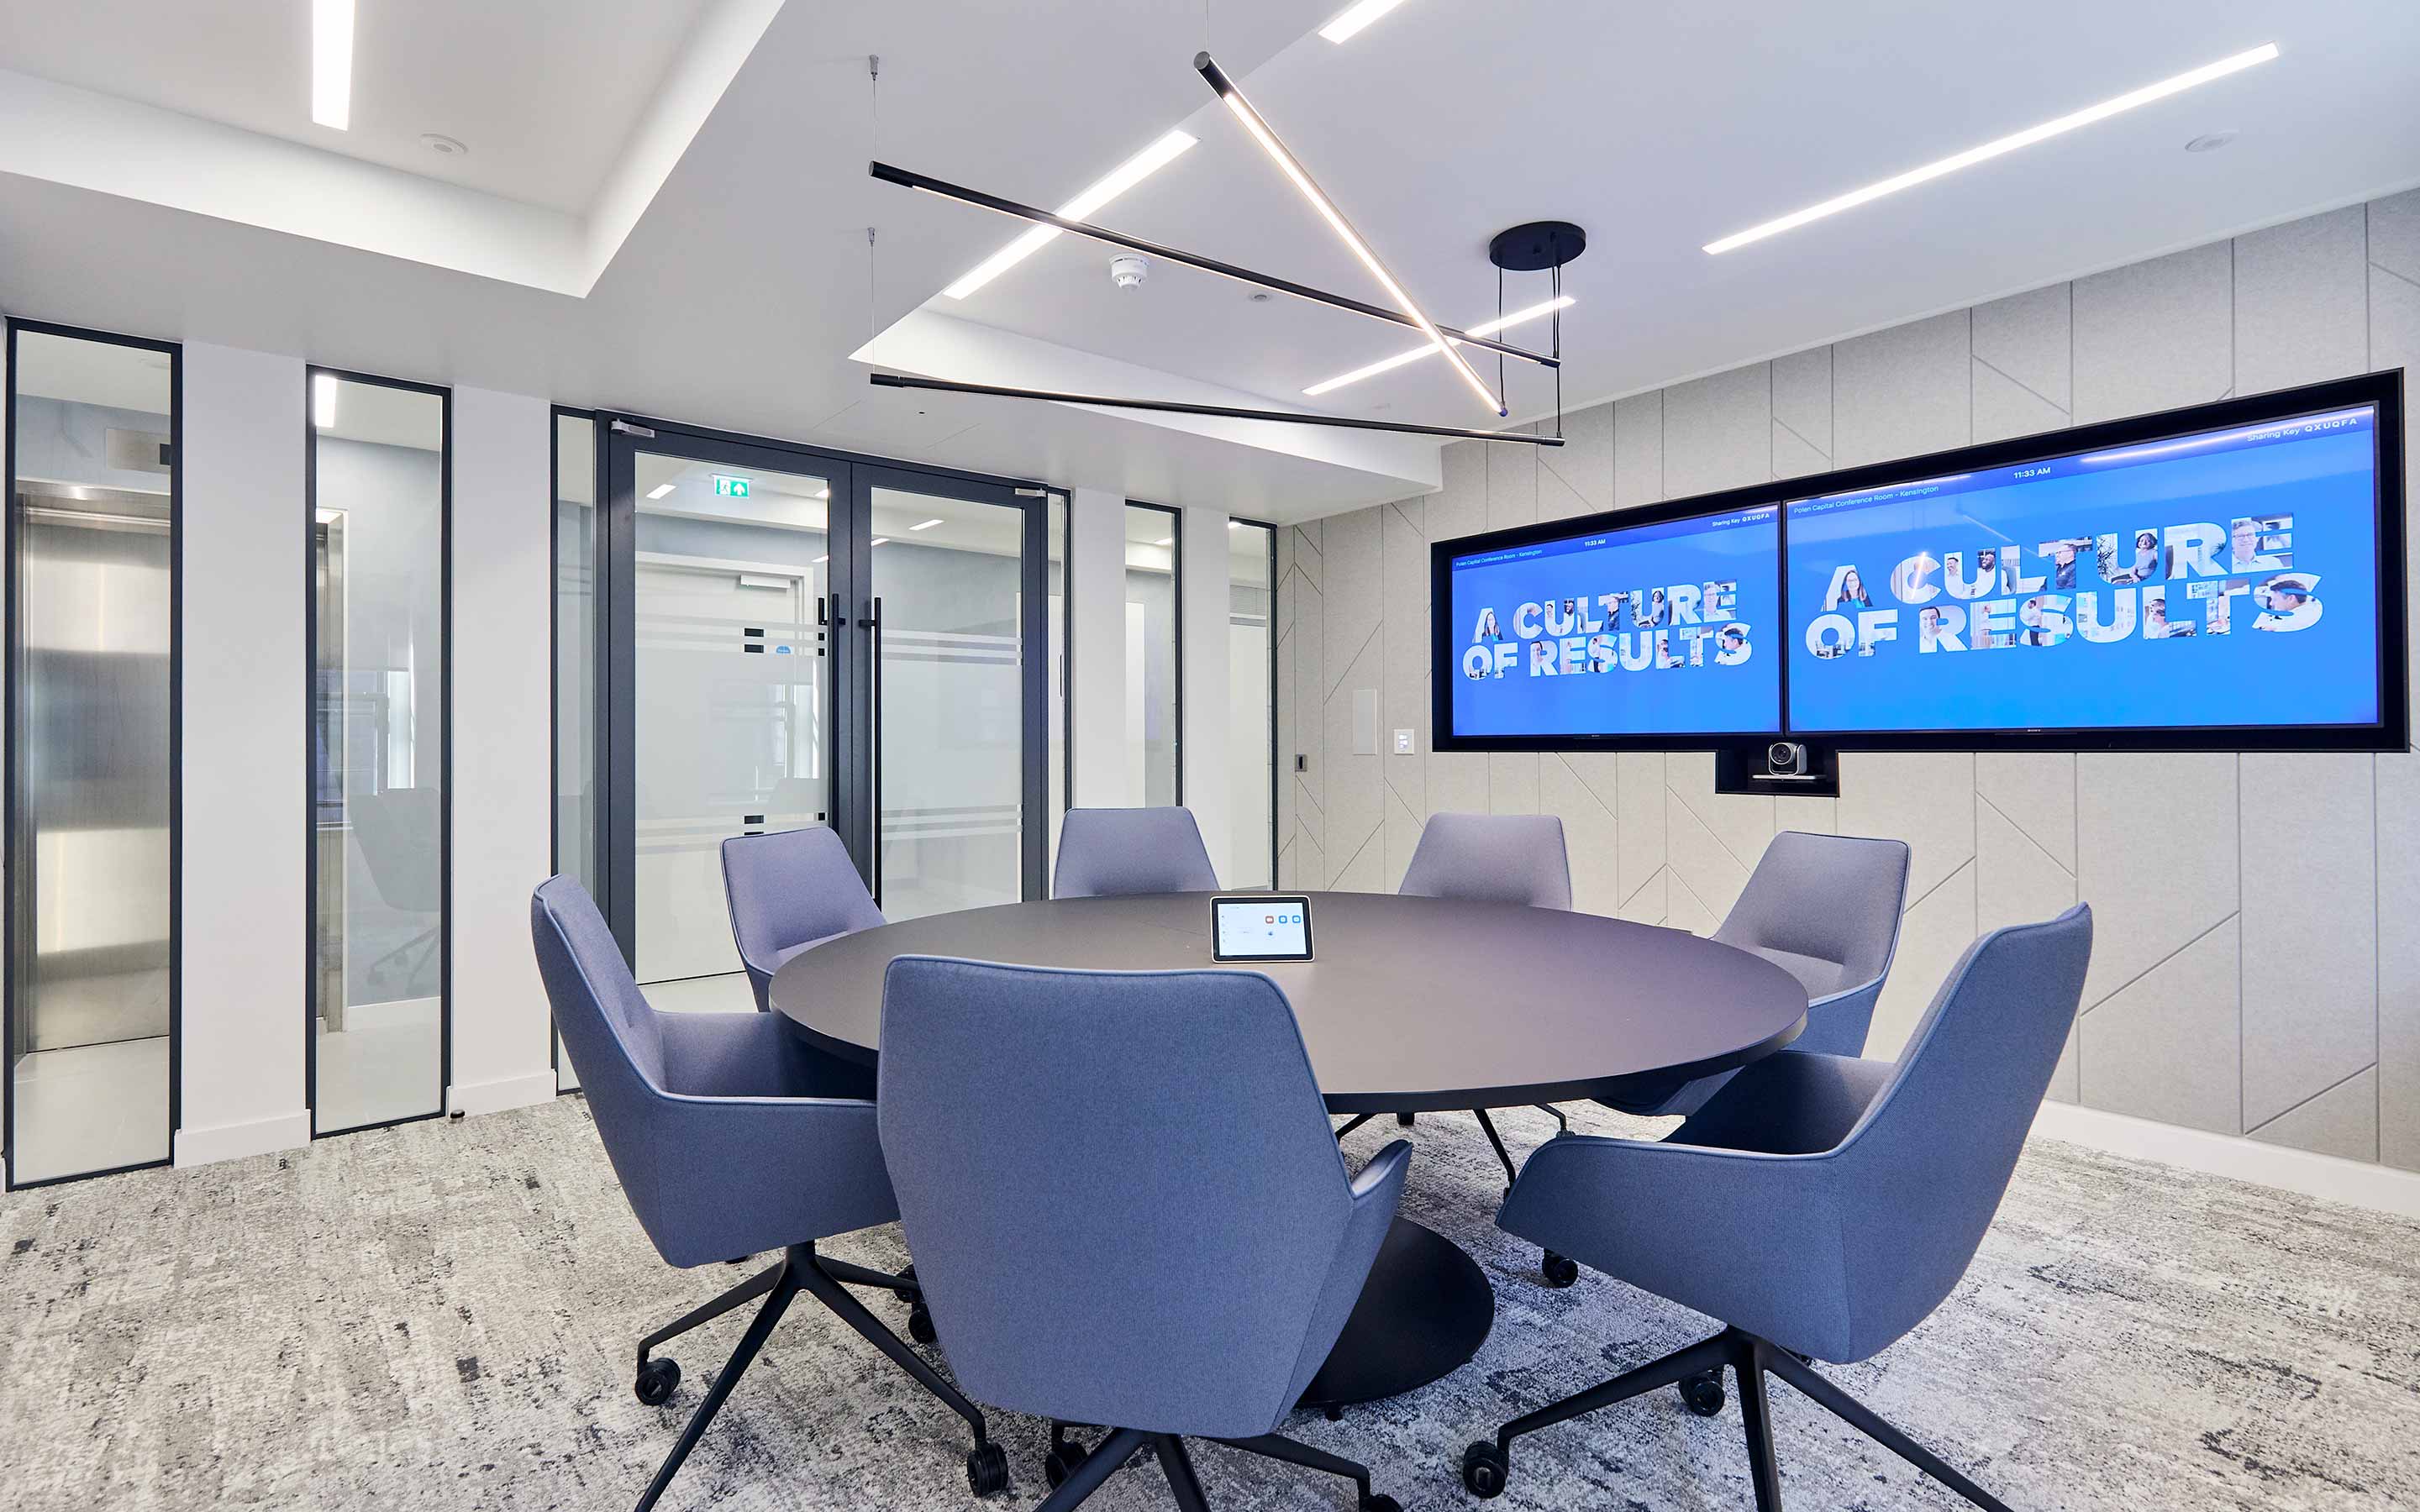 Office conference room featuring bright blue chairs and a large screen for meetings in workplace setting